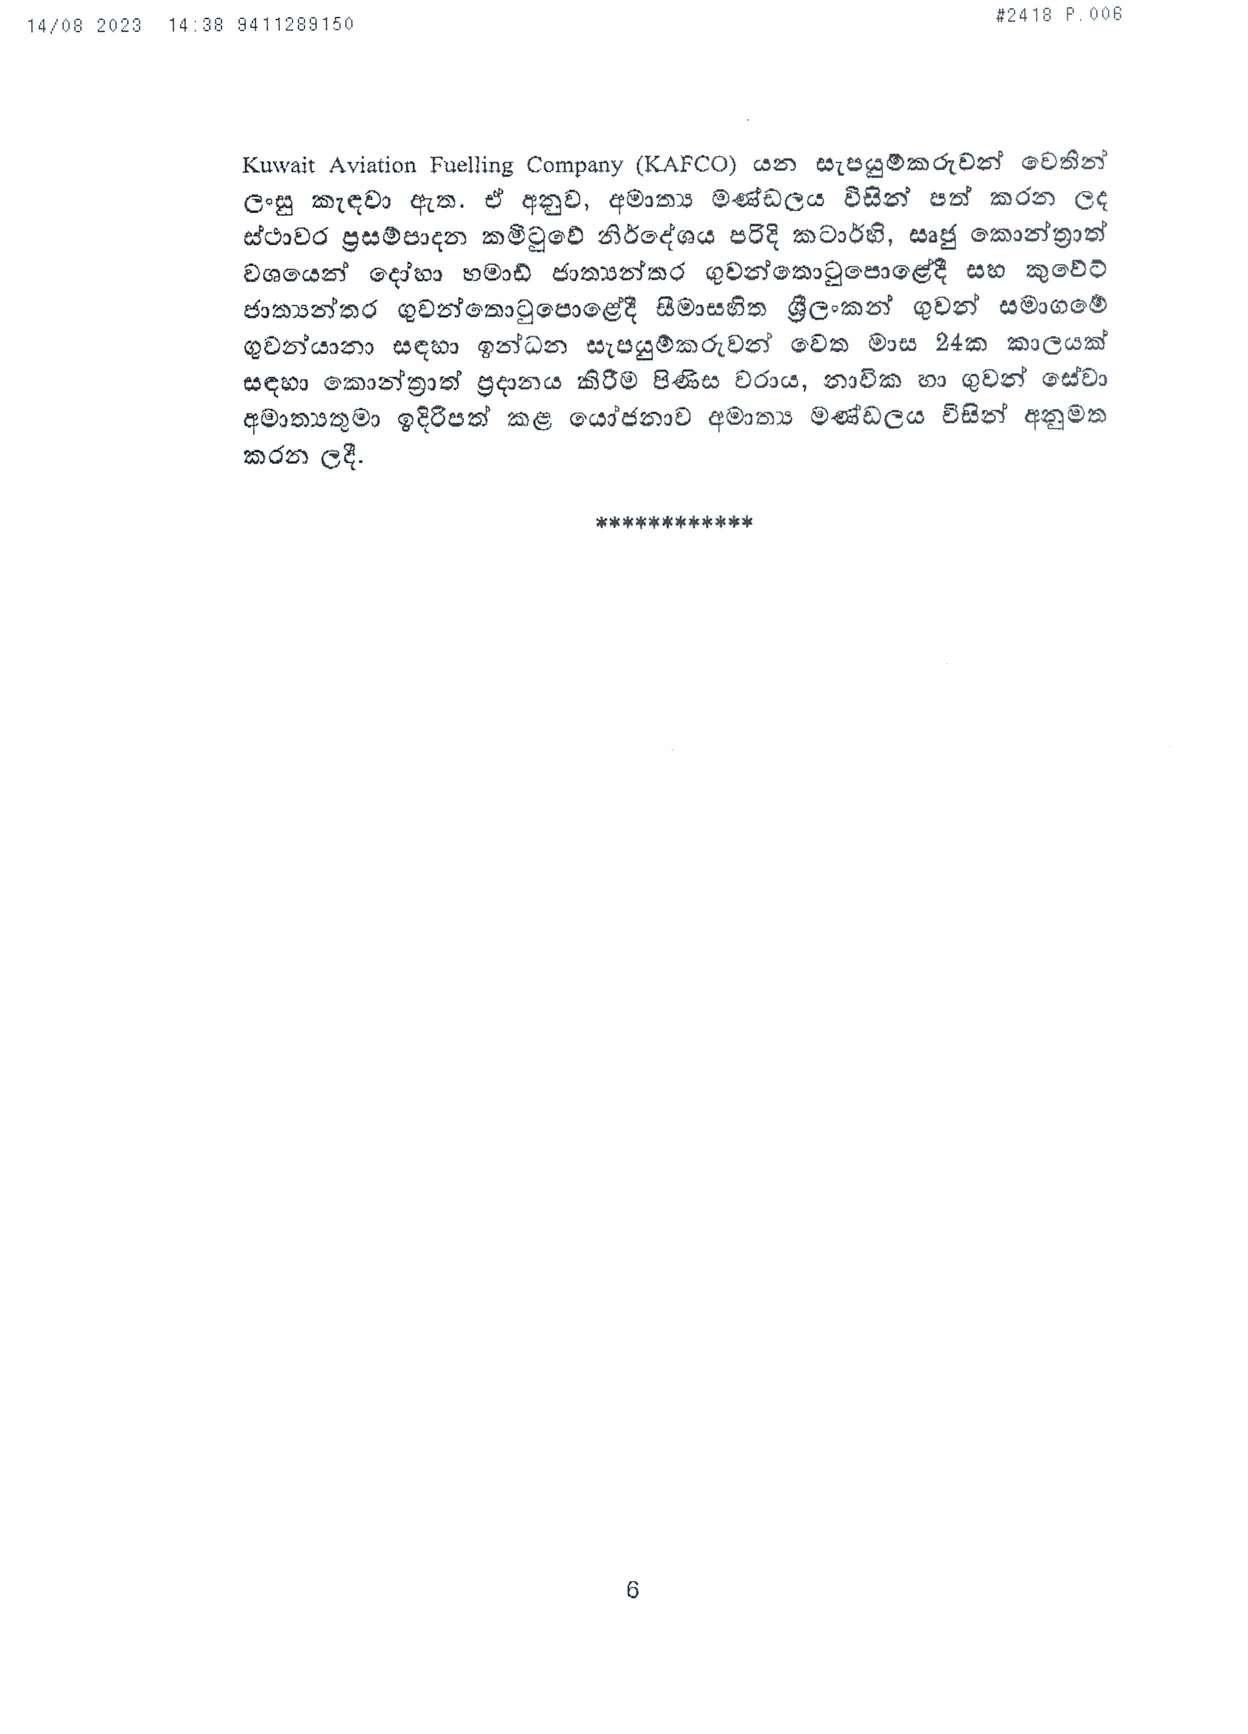 Cabinet Decision on 14.08.2023 page 006